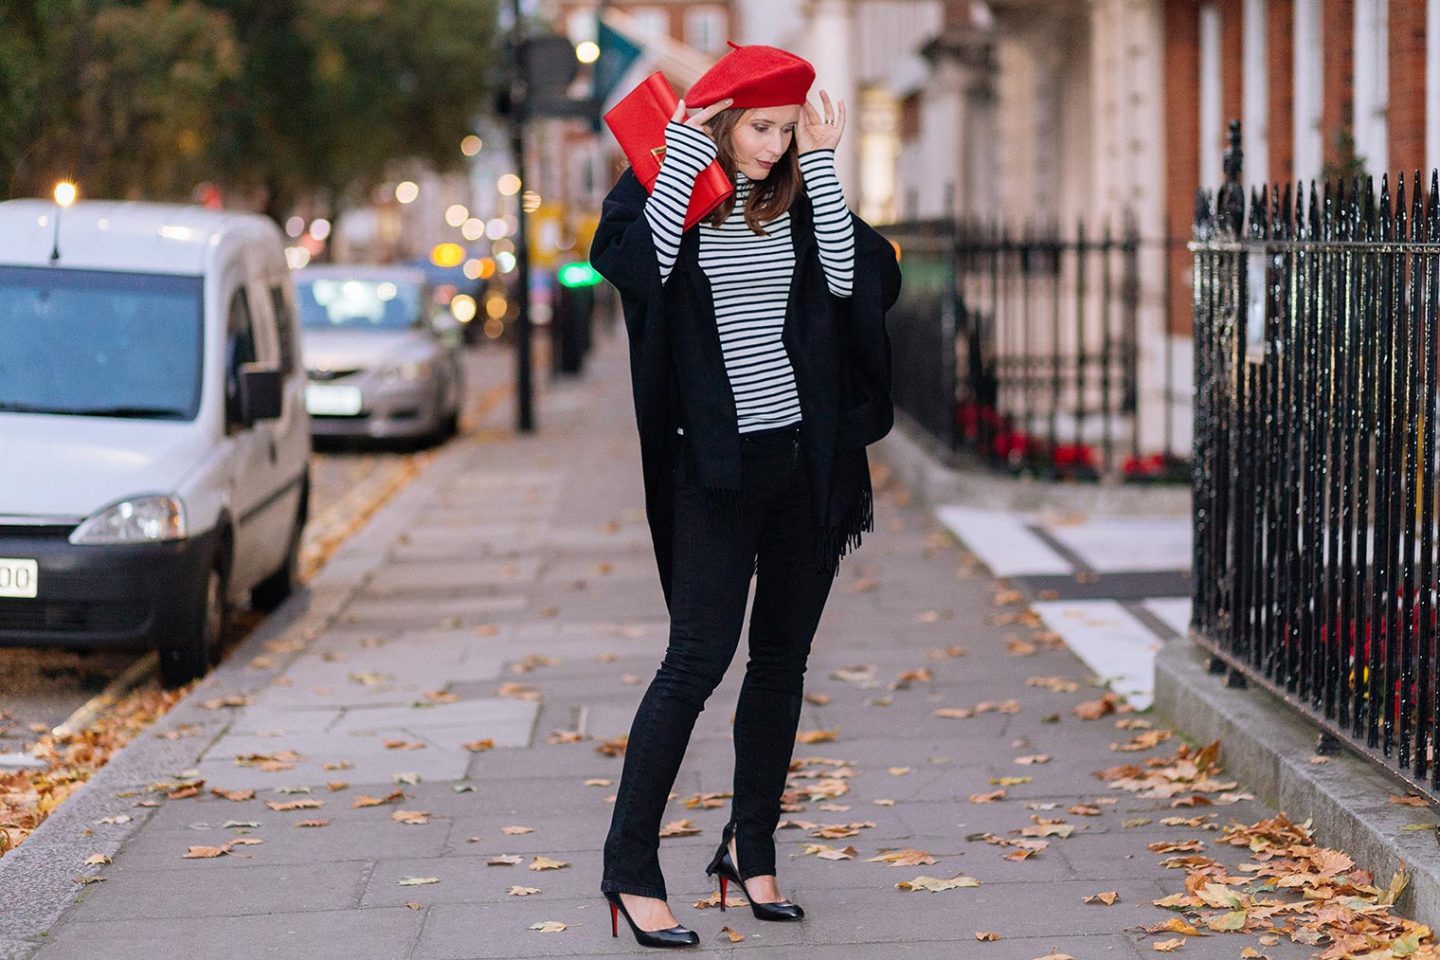 How to wear a beret and look Parisian chic this season